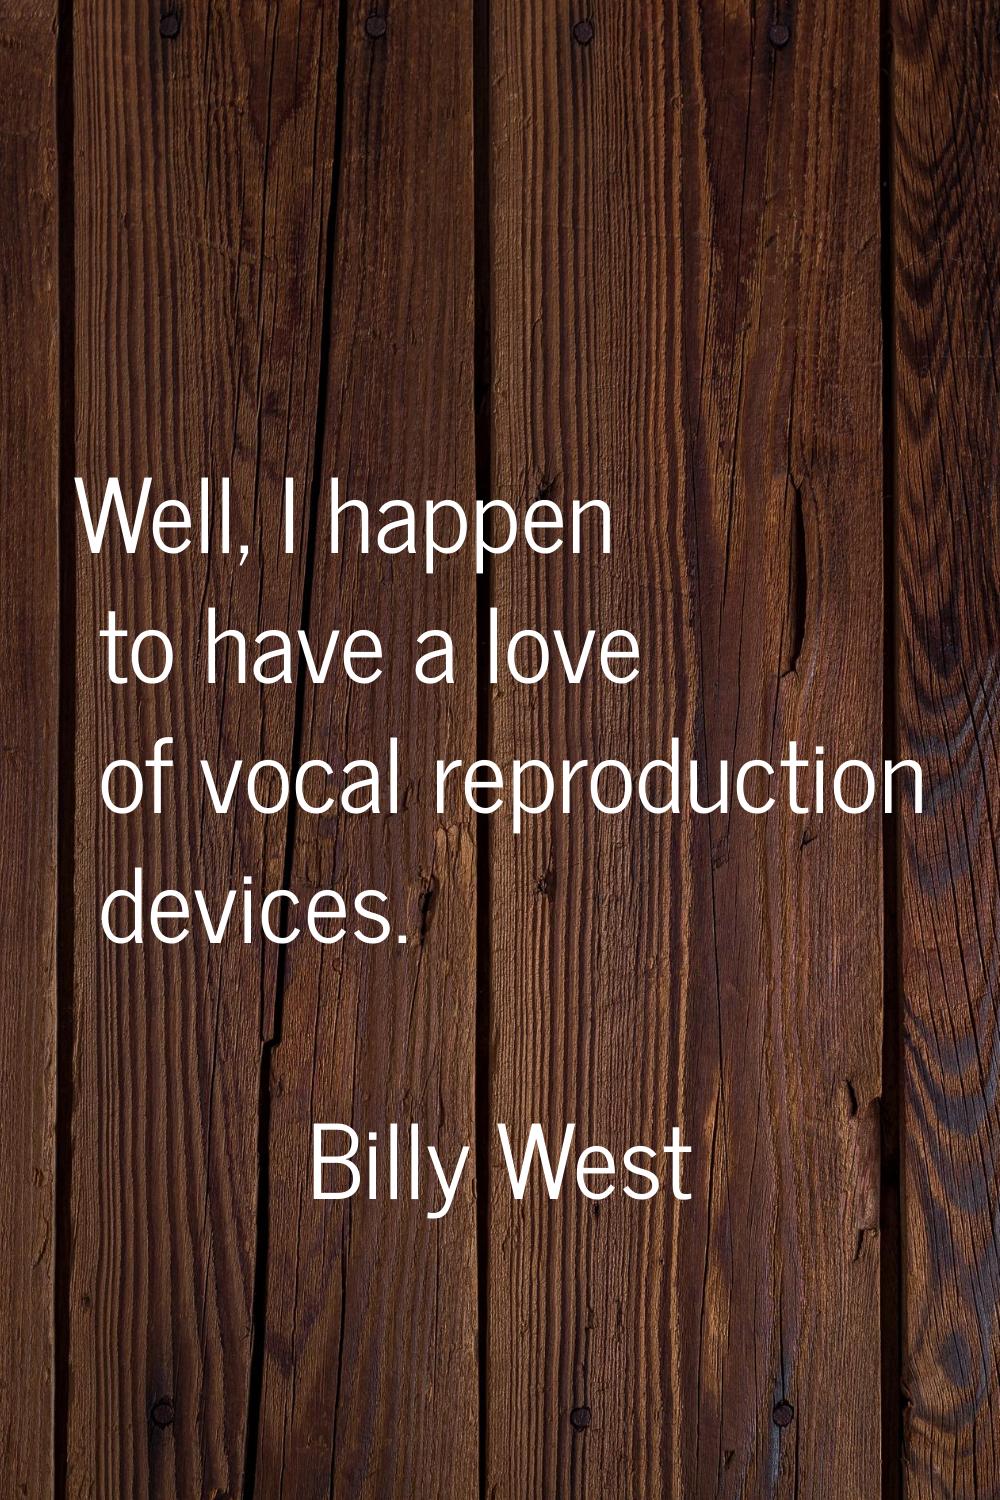 Well, I happen to have a love of vocal reproduction devices.